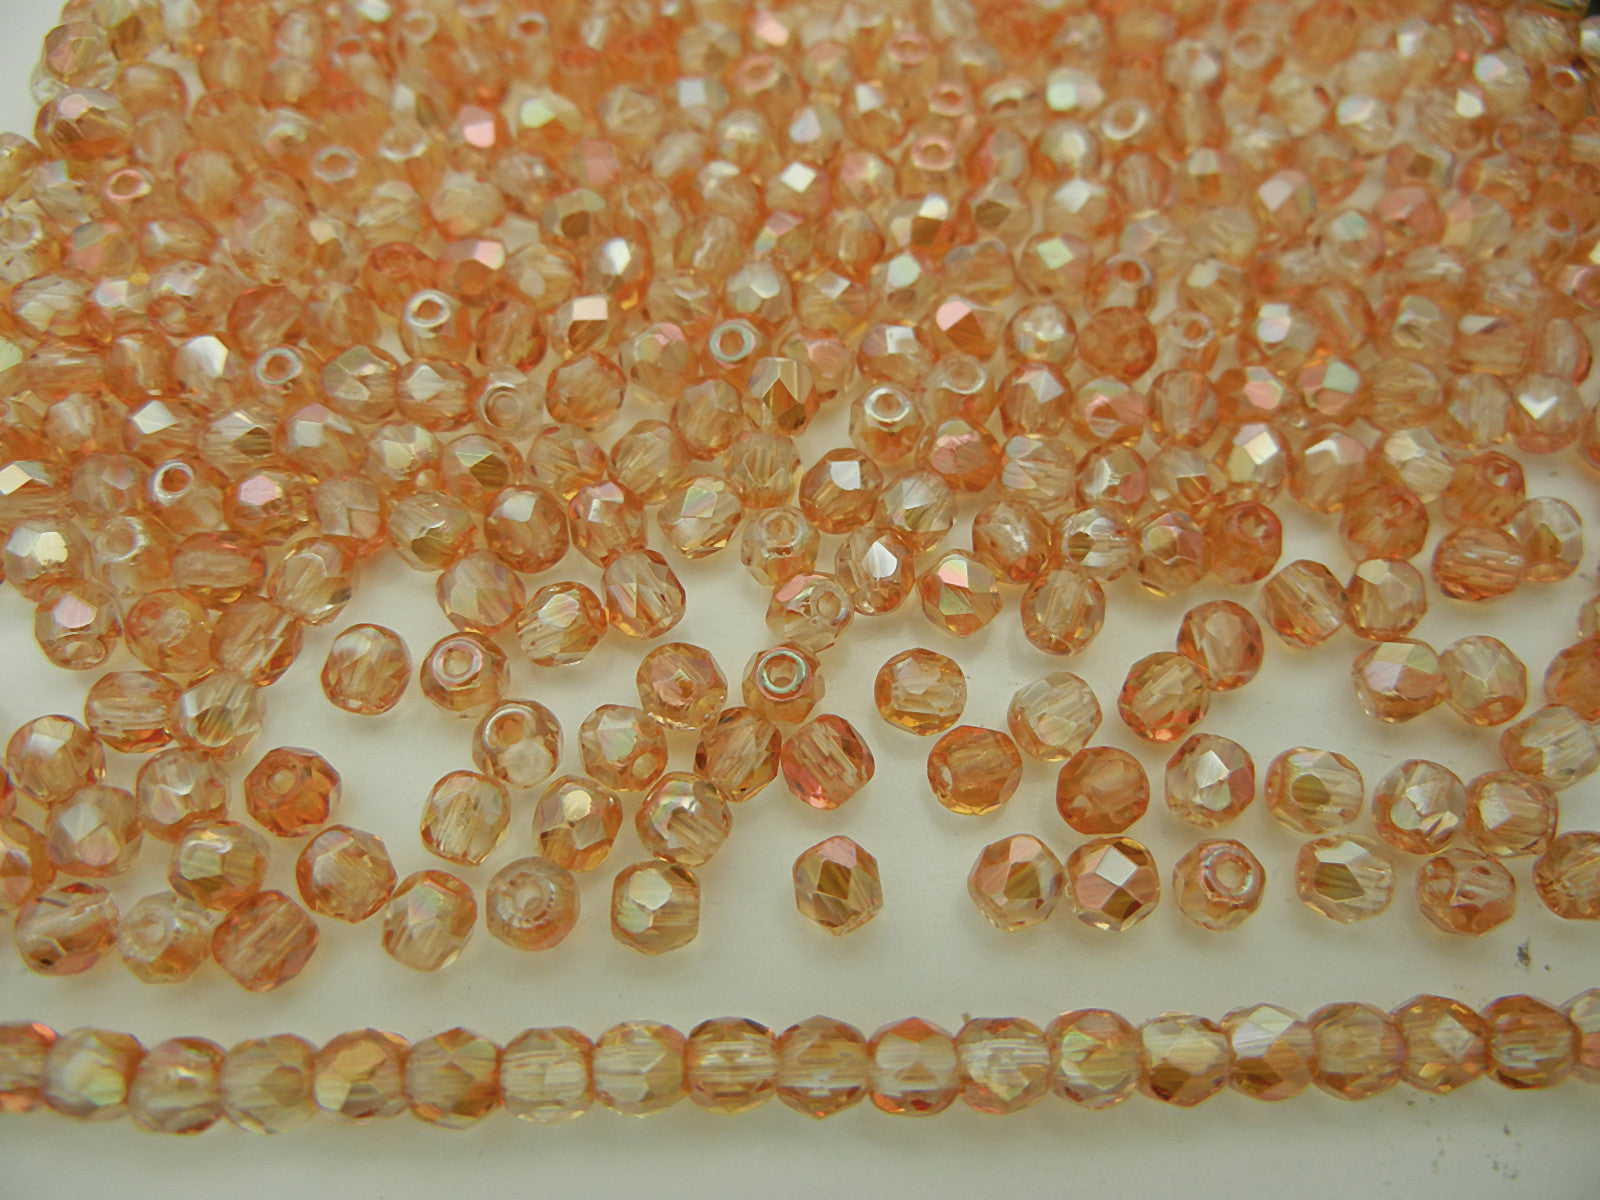 Crystal Apricot Medium, loose Czech Fire Polished Round Faceted Glass Beads